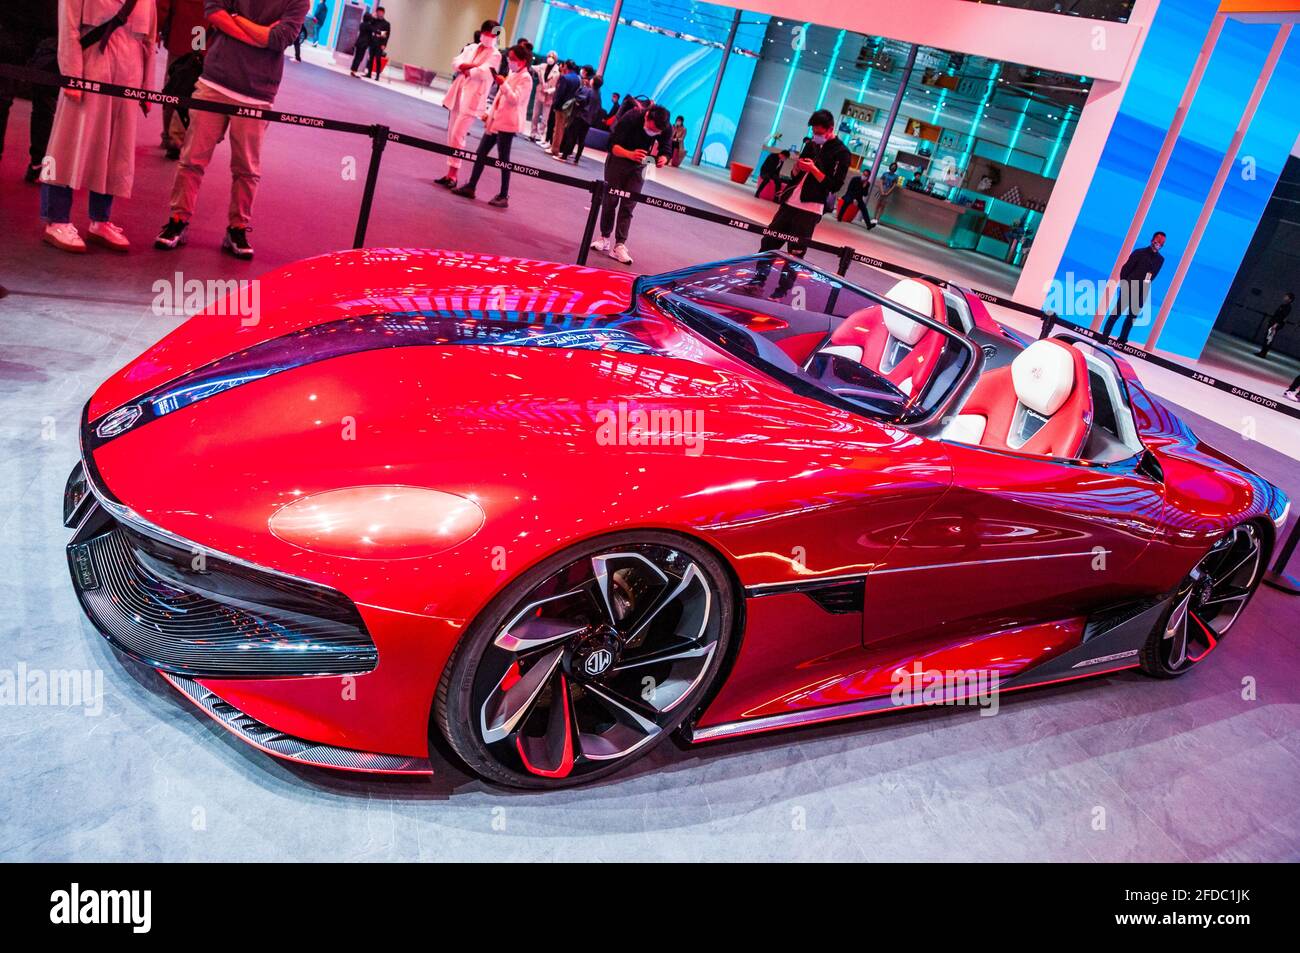 VIDEO: MG debuts new Cyberster concept sports car